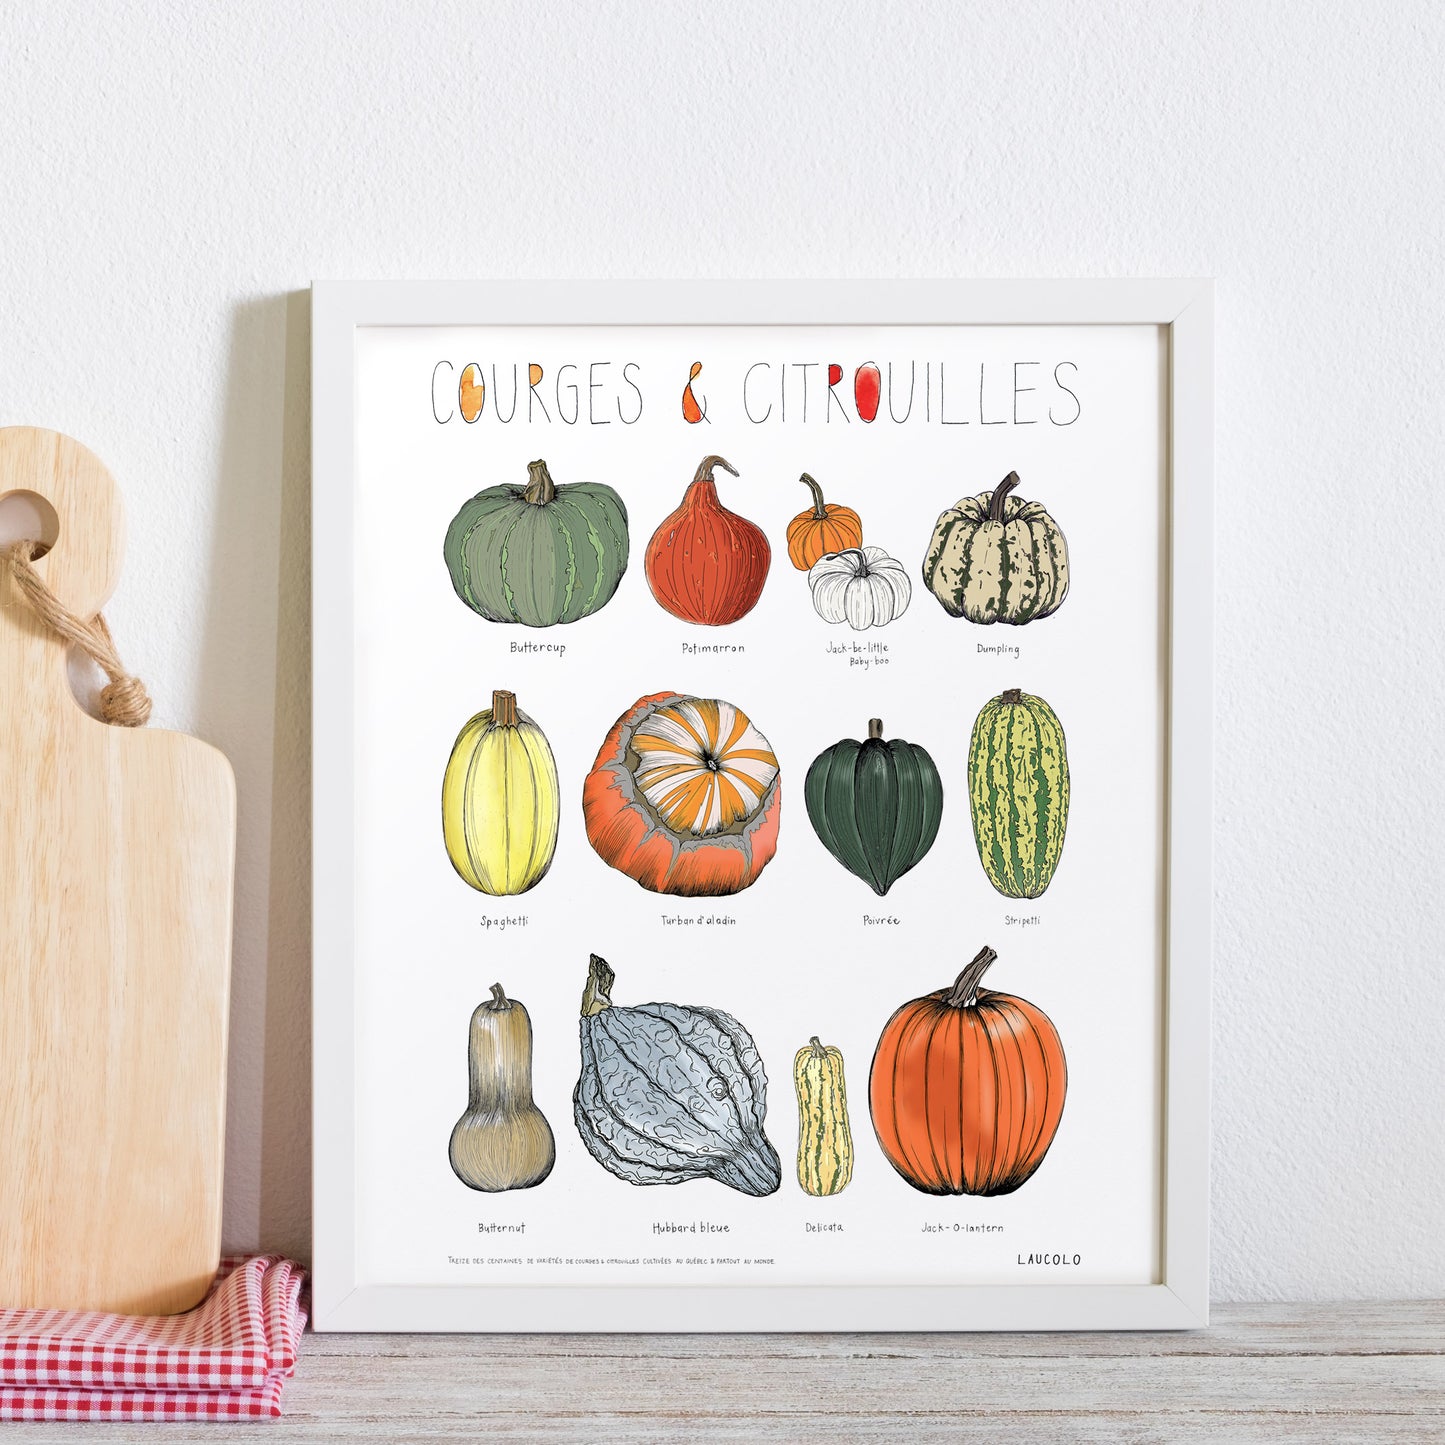 Pumpkins and gourds illustration poster in white frame leaning against wall next to wood cutting board